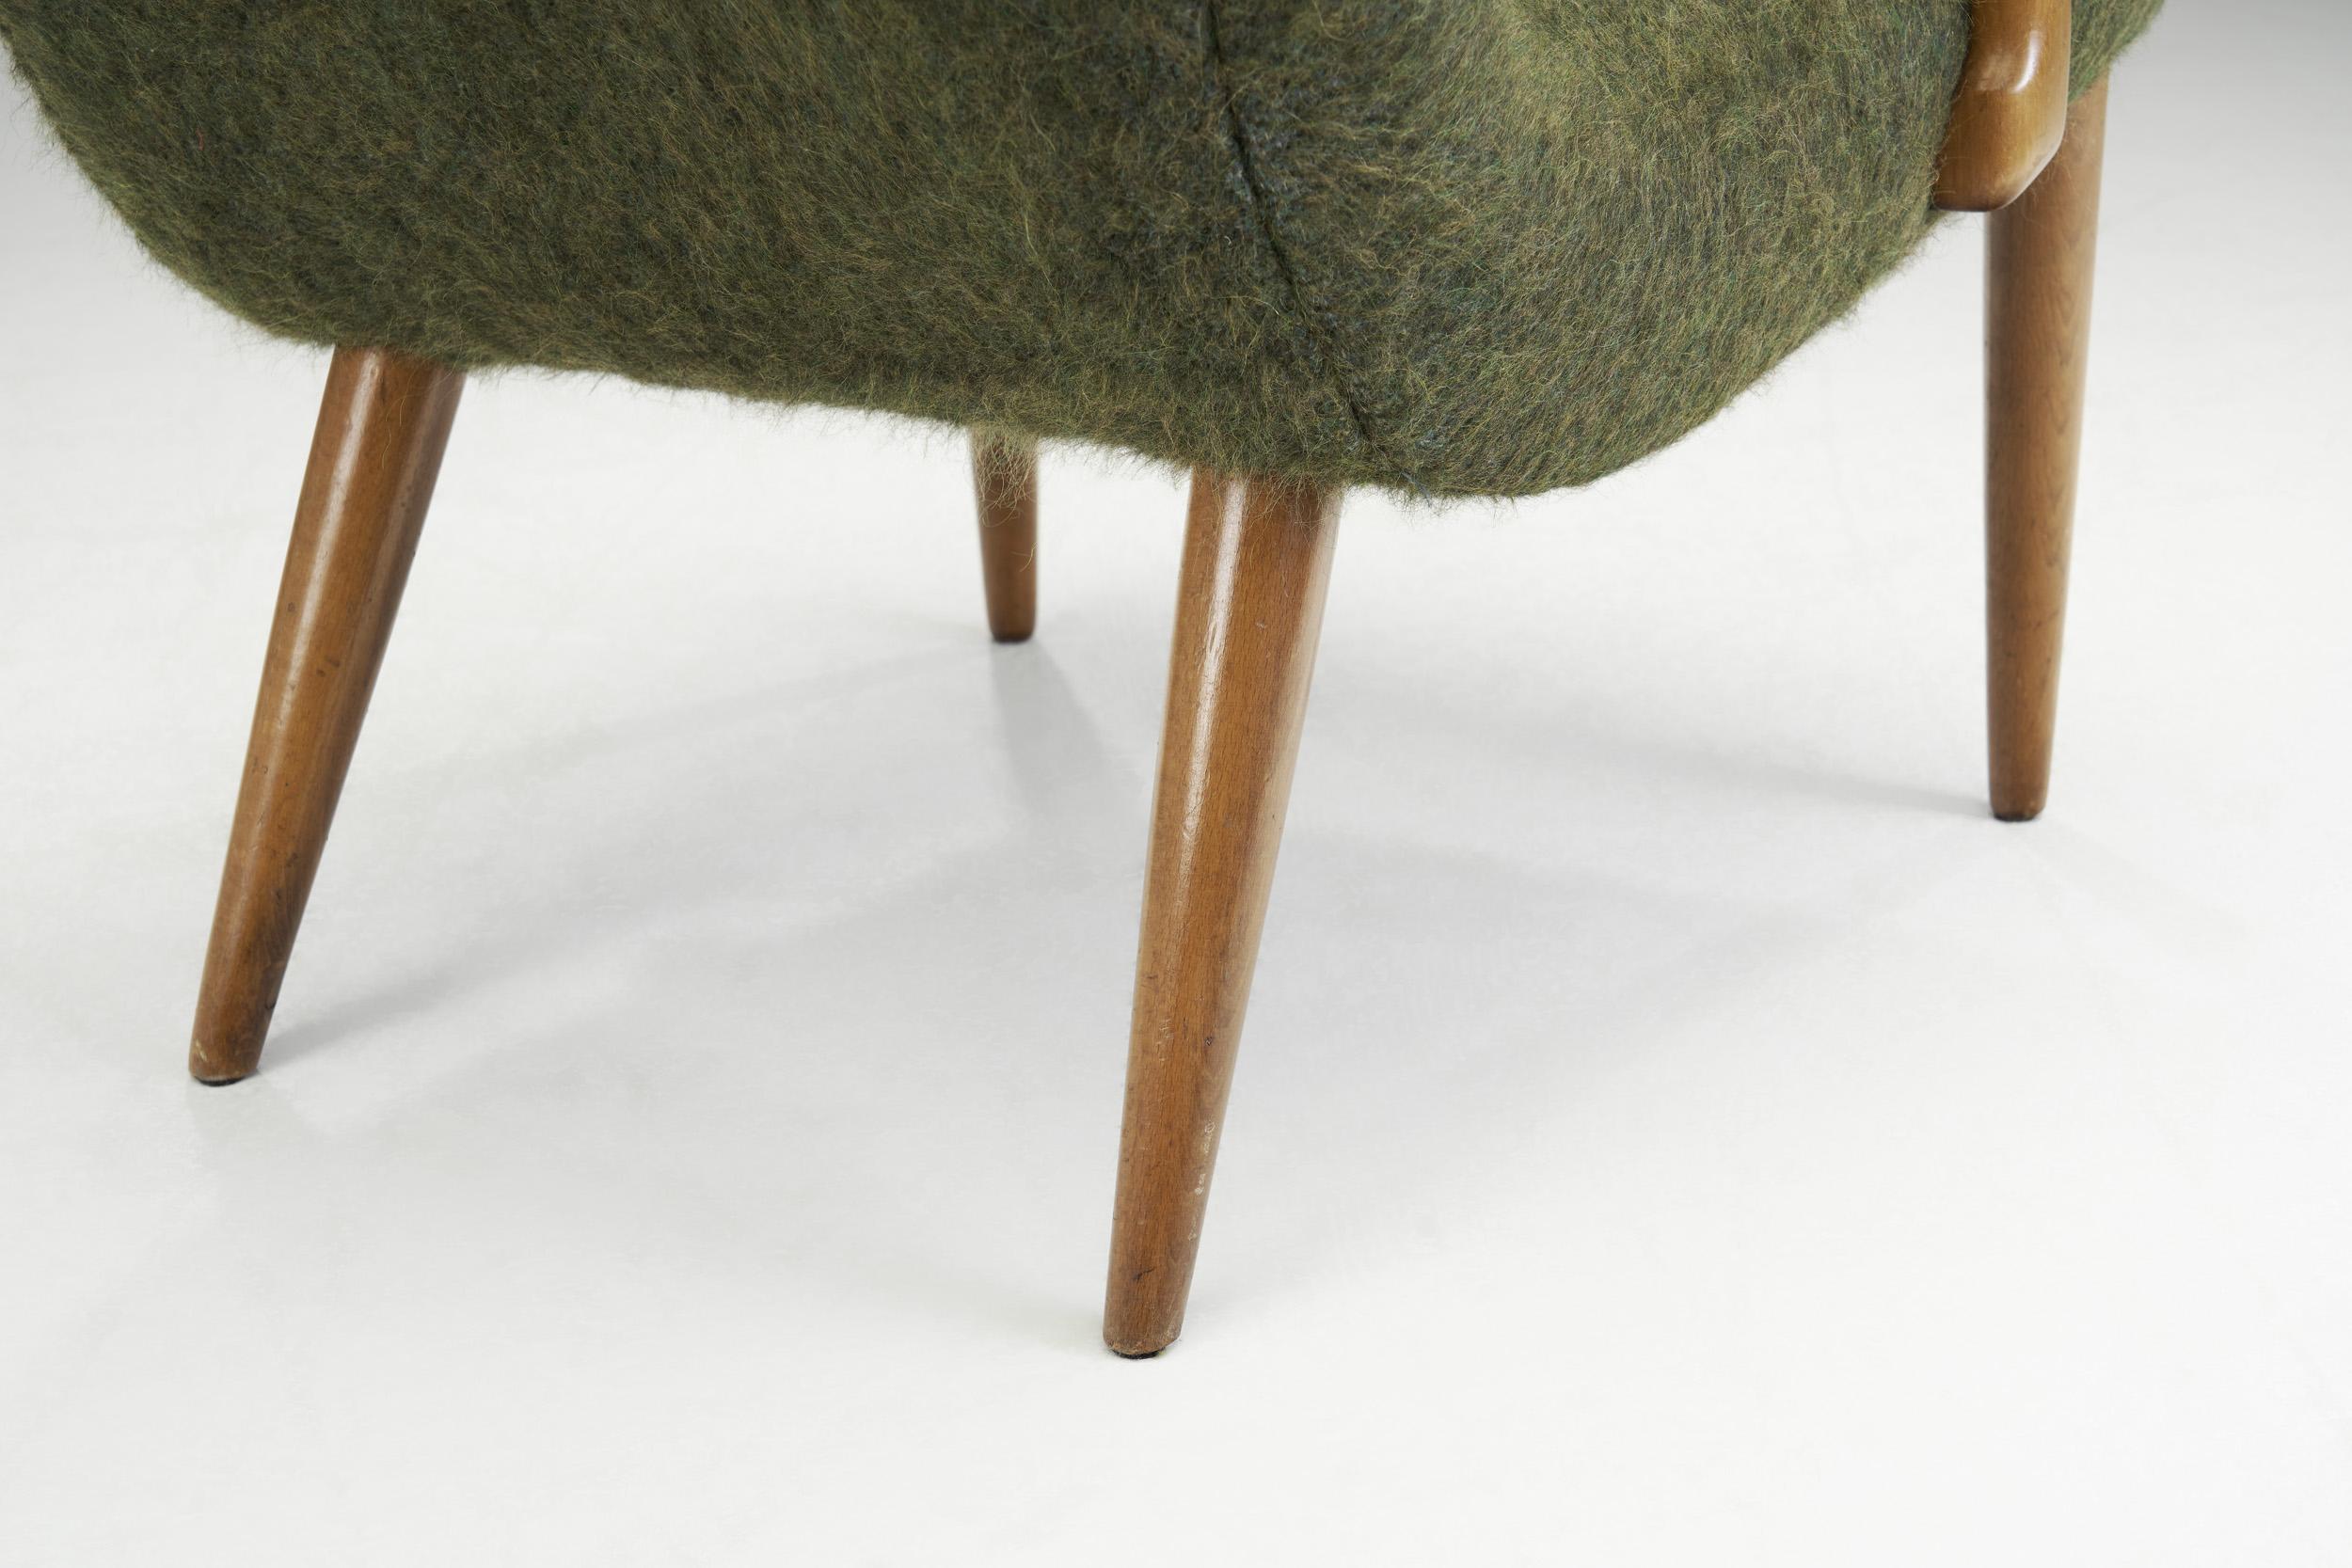 Danish Upholstered Easy Chair with Stained Beech Frame, Denmark, 1950s For Sale 9